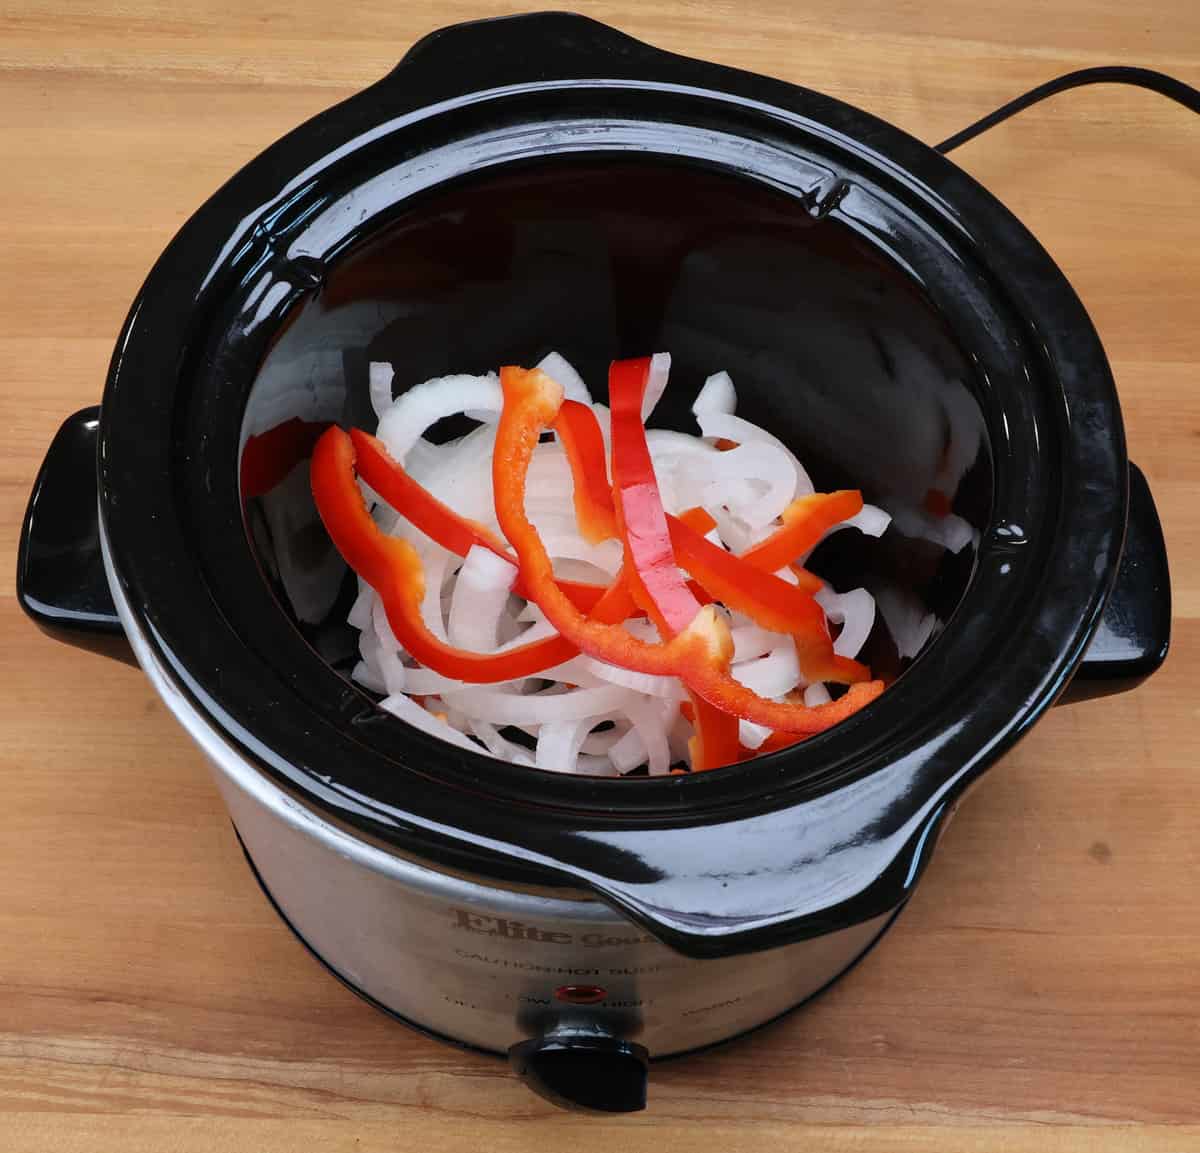 sliced onions and red bell peppers in the base of a slow cooker.